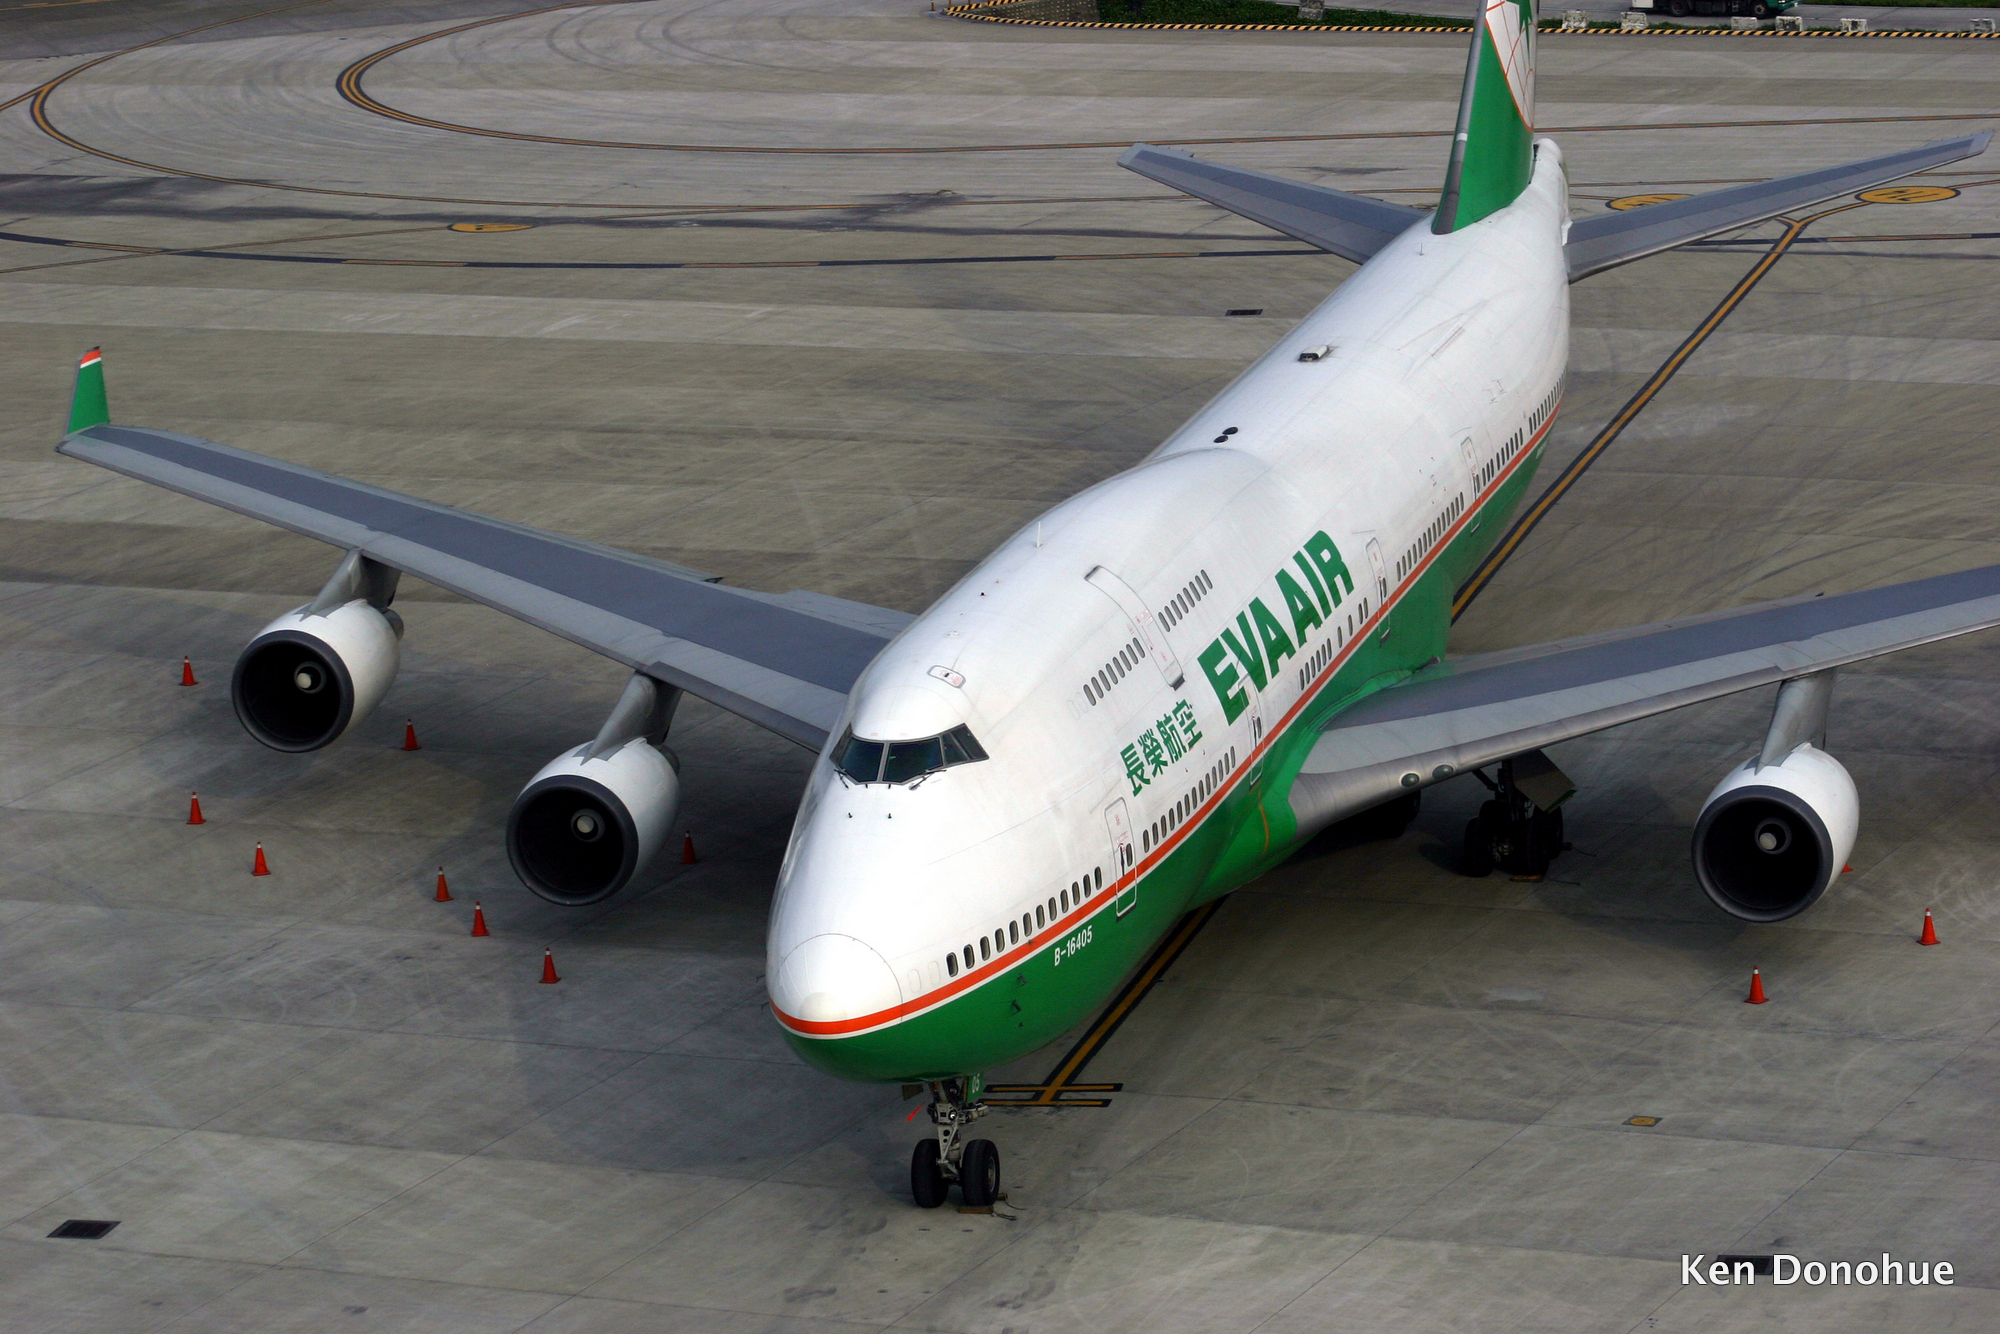 The Queen of the Skies Still Delights on EVA Air AirlineReporter